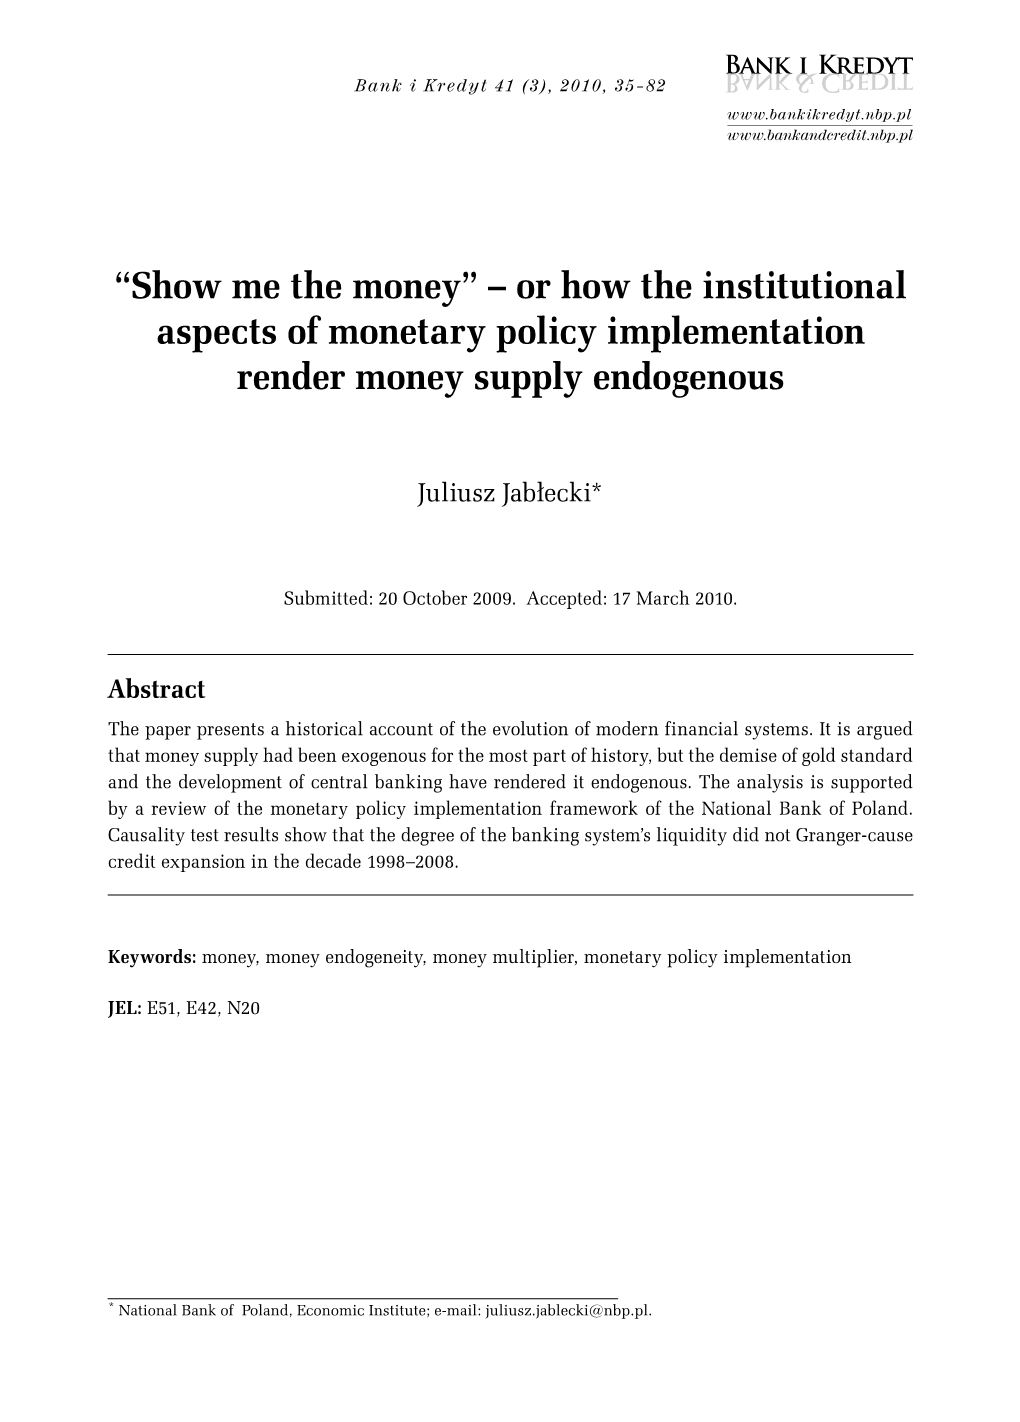 “Show Me the Money” – Or How the Institutional Aspects of Monetary Policy Implementation Render Money Supply Endogenous